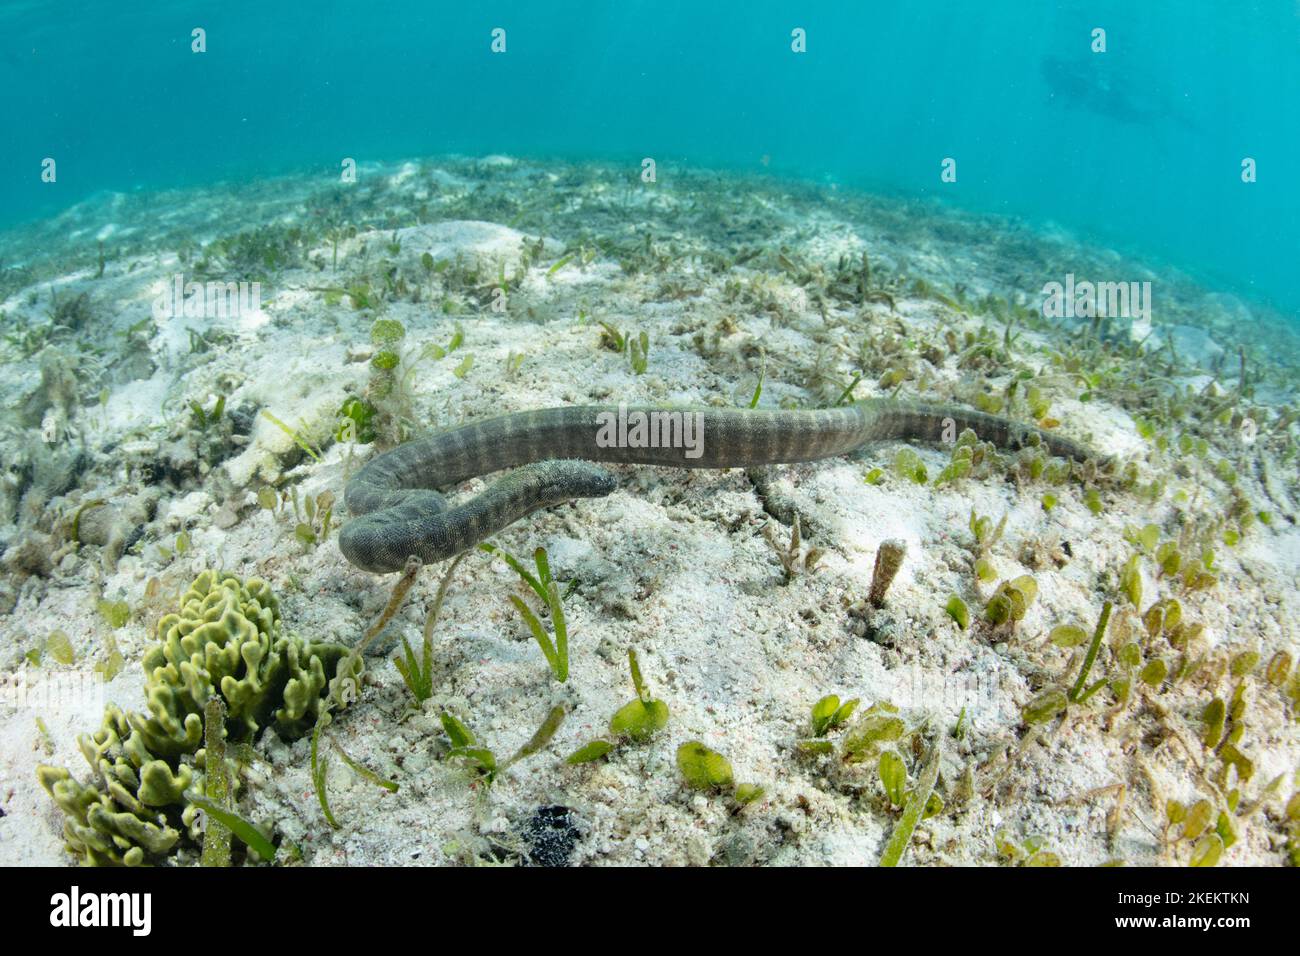 A Marine file snake, Acrochordus granulatus, hunts for small fish in a shallow seagrass meadow in Komodo National Park, Indonesia. Stock Photo